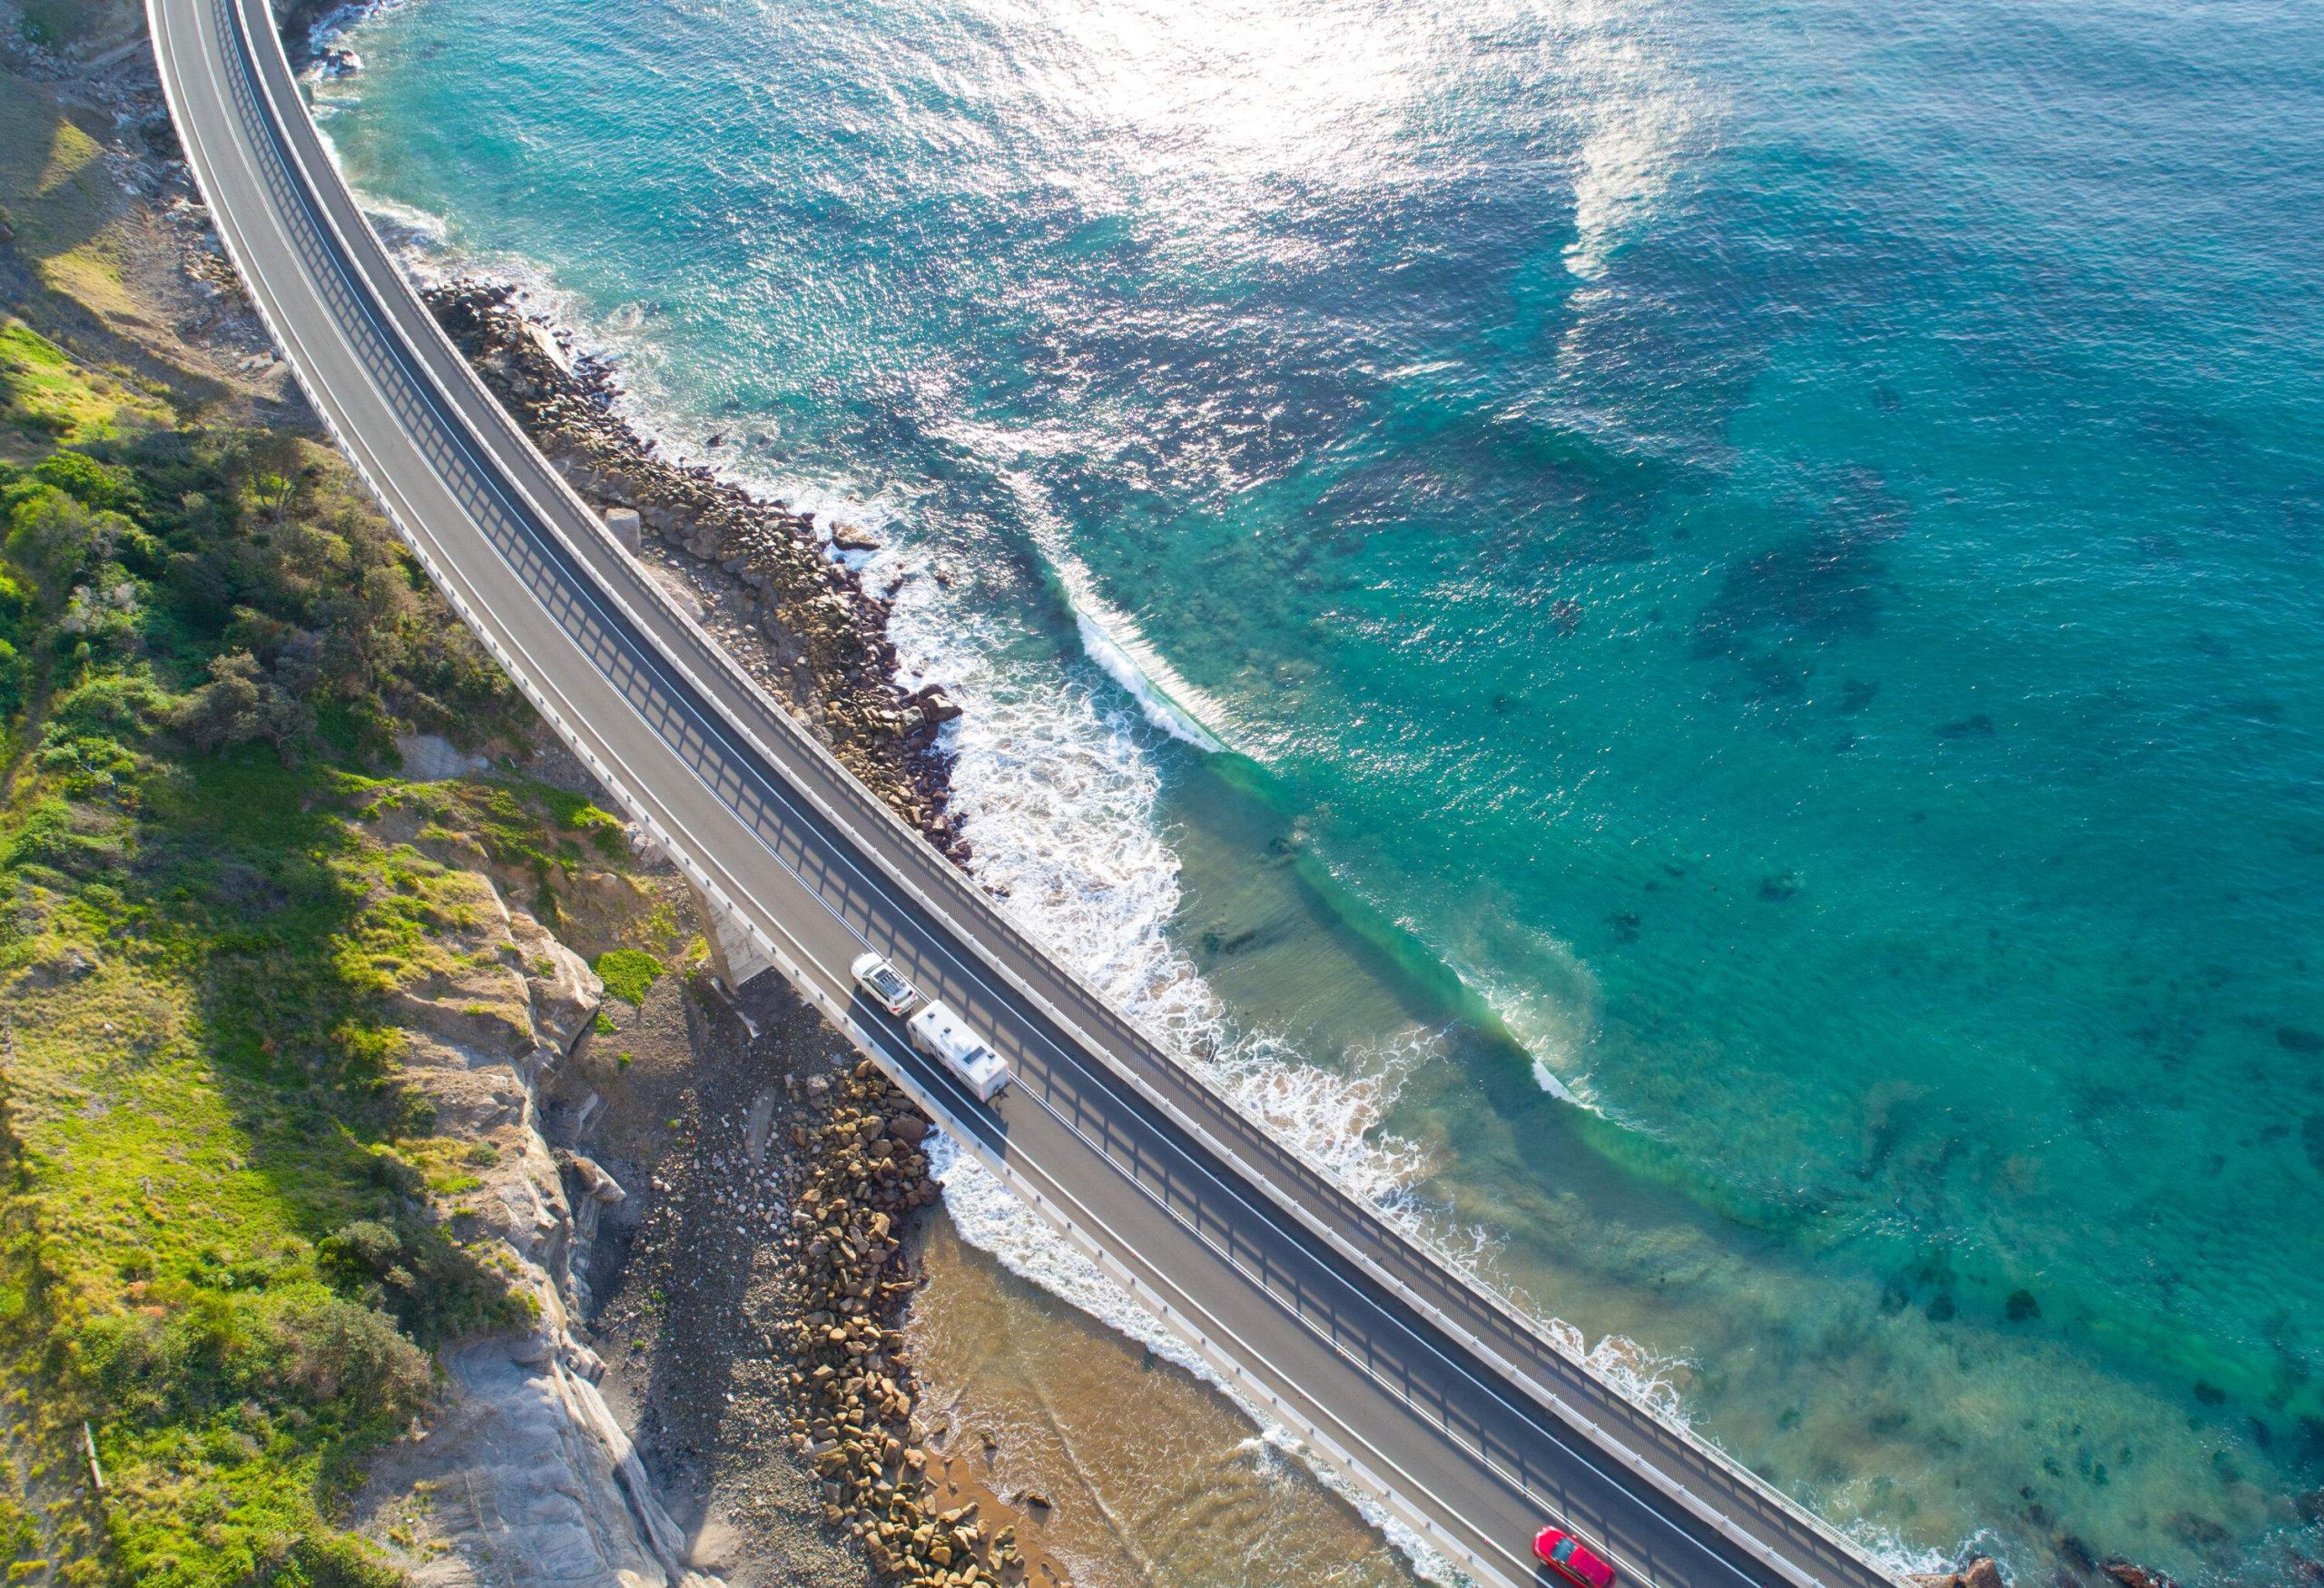 The Sea Cliff Bridge spans across the ocean, with cars traversing the scenic route, offering a breathtaking and exhilarating experience of man-made infrastructure amidst the stunning natural environment.